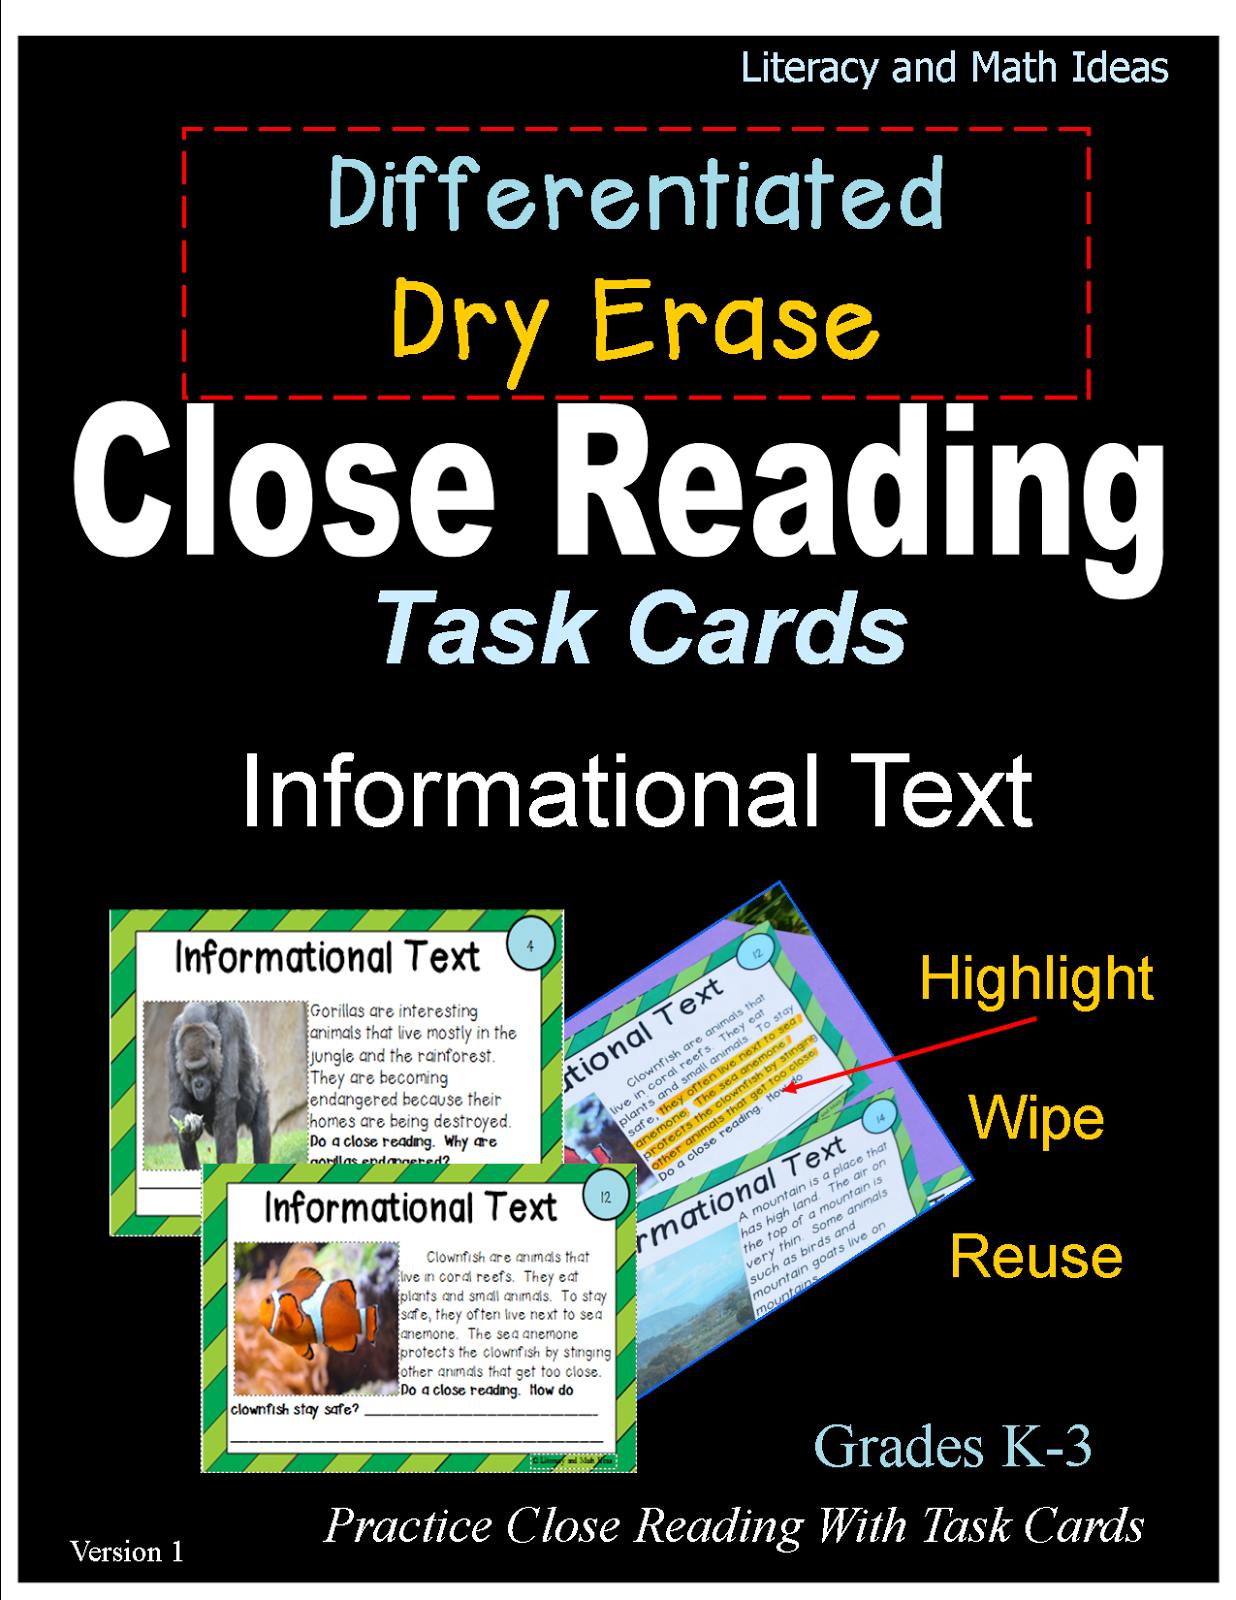 literacy-math-ideas-dry-erase-close-reading-task-cards-informational